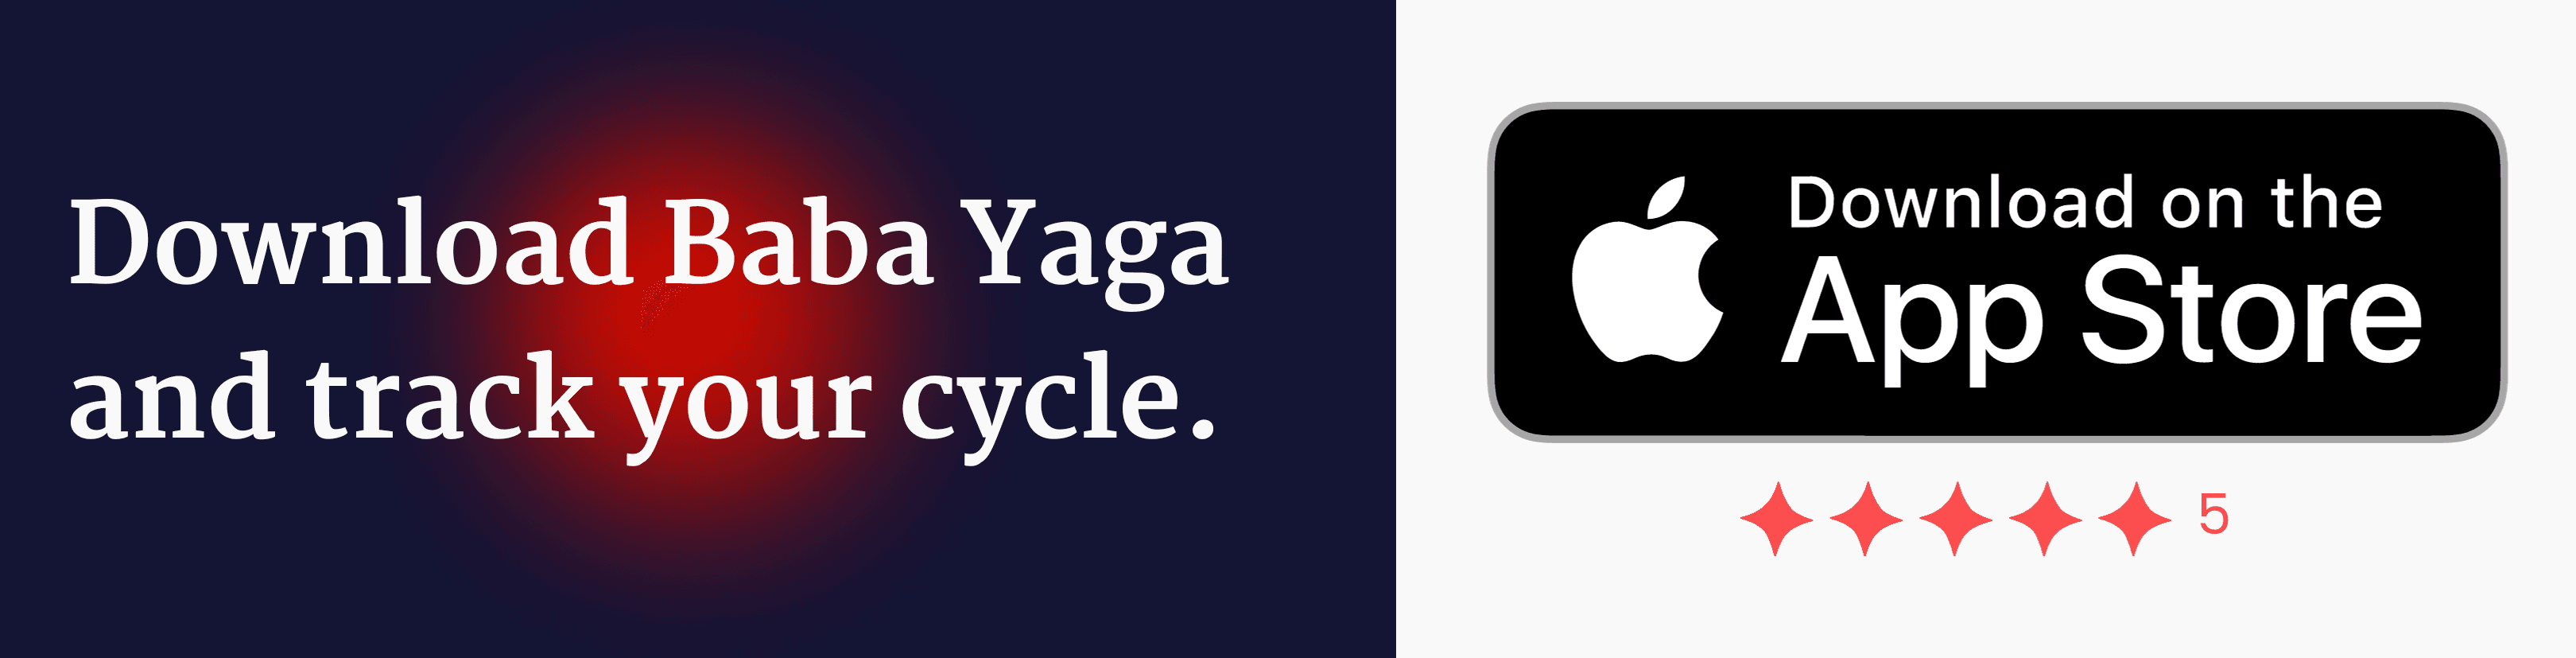 Download Baba Yaga and track your cycle.